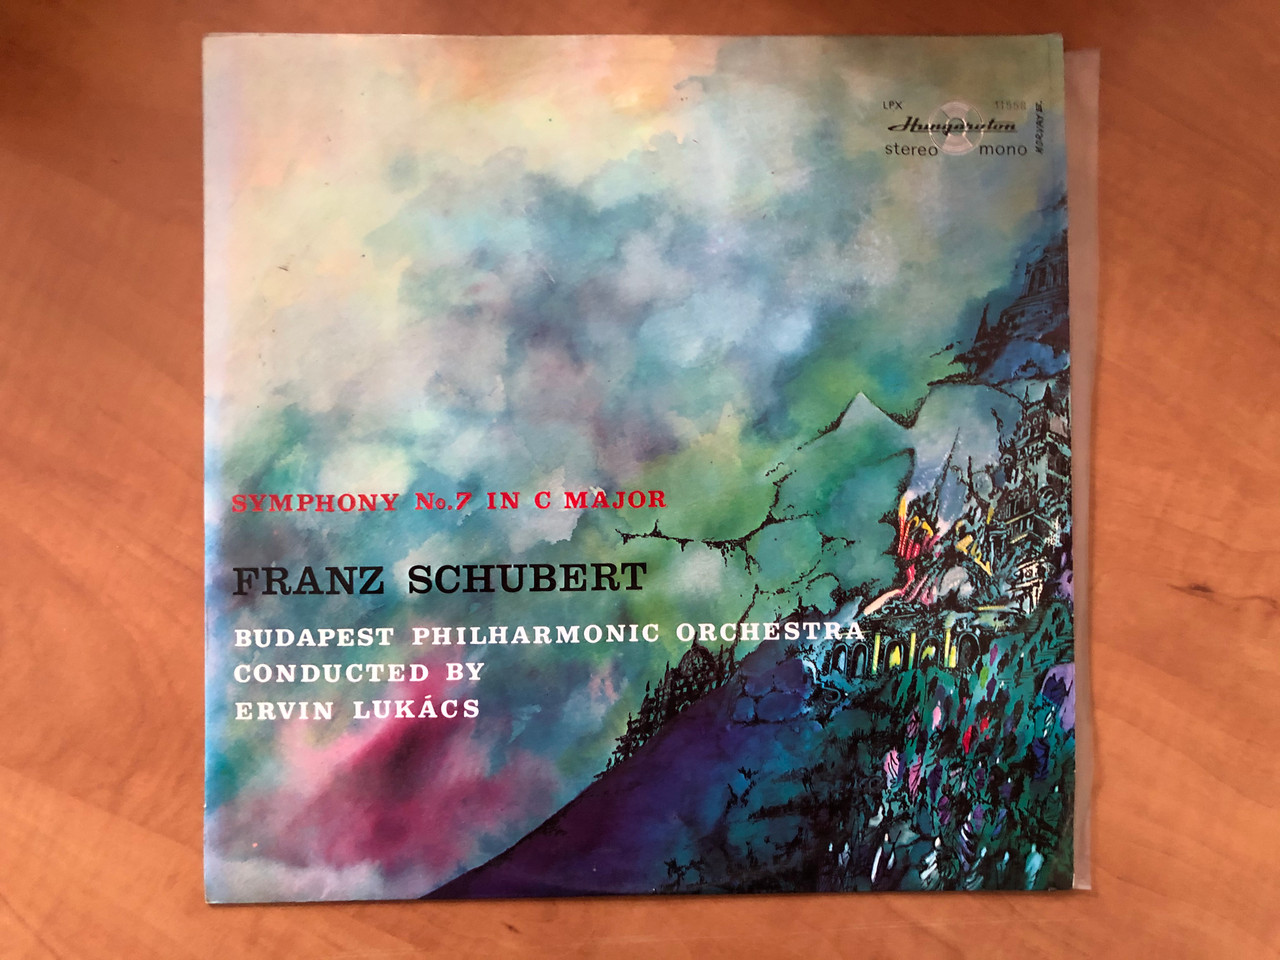 https://cdn10.bigcommerce.com/s-62bdpkt7pb/products/30901/images/182259/Symphony_No._7_In_C_Major_-_Franz_Schubert_Budapest_Philharmonic_Orchestra_Conducted_By_Ervin_Lukcs_Hungaroton_LP_Stereo_Mono_LPX_11558_1__91156.1624393798.1280.1280.JPG?c=2